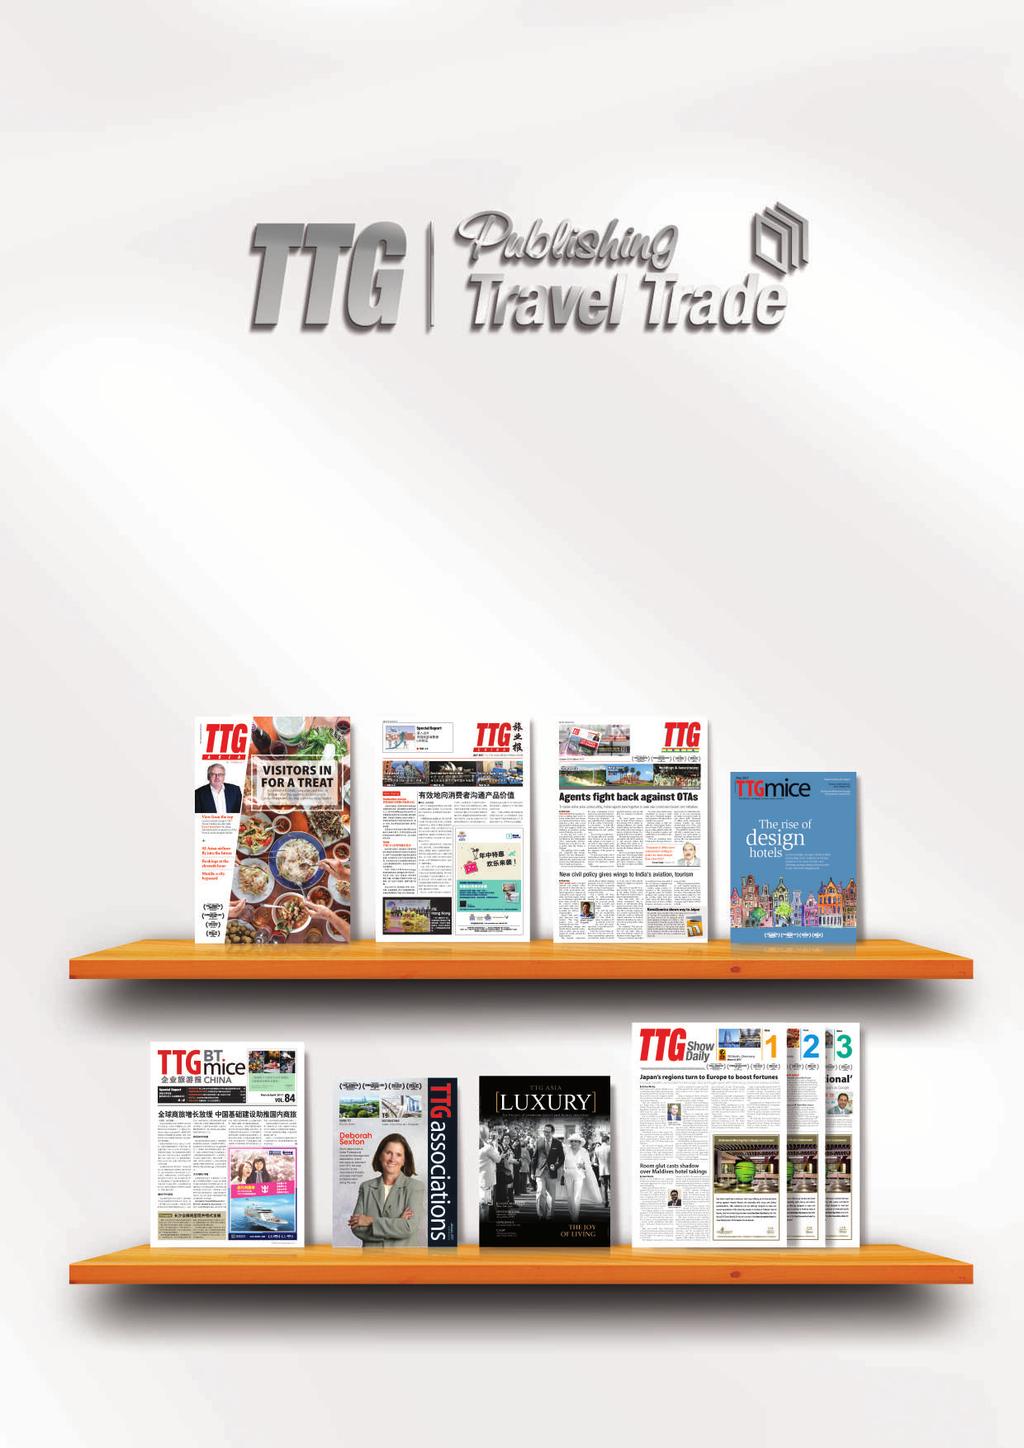 One Travel Trade Connection. Infinite Possibilities. TTG Travel Trade Publishing has been connecting Asia-Pacific s travel industry with its leading trade publications since 1974.